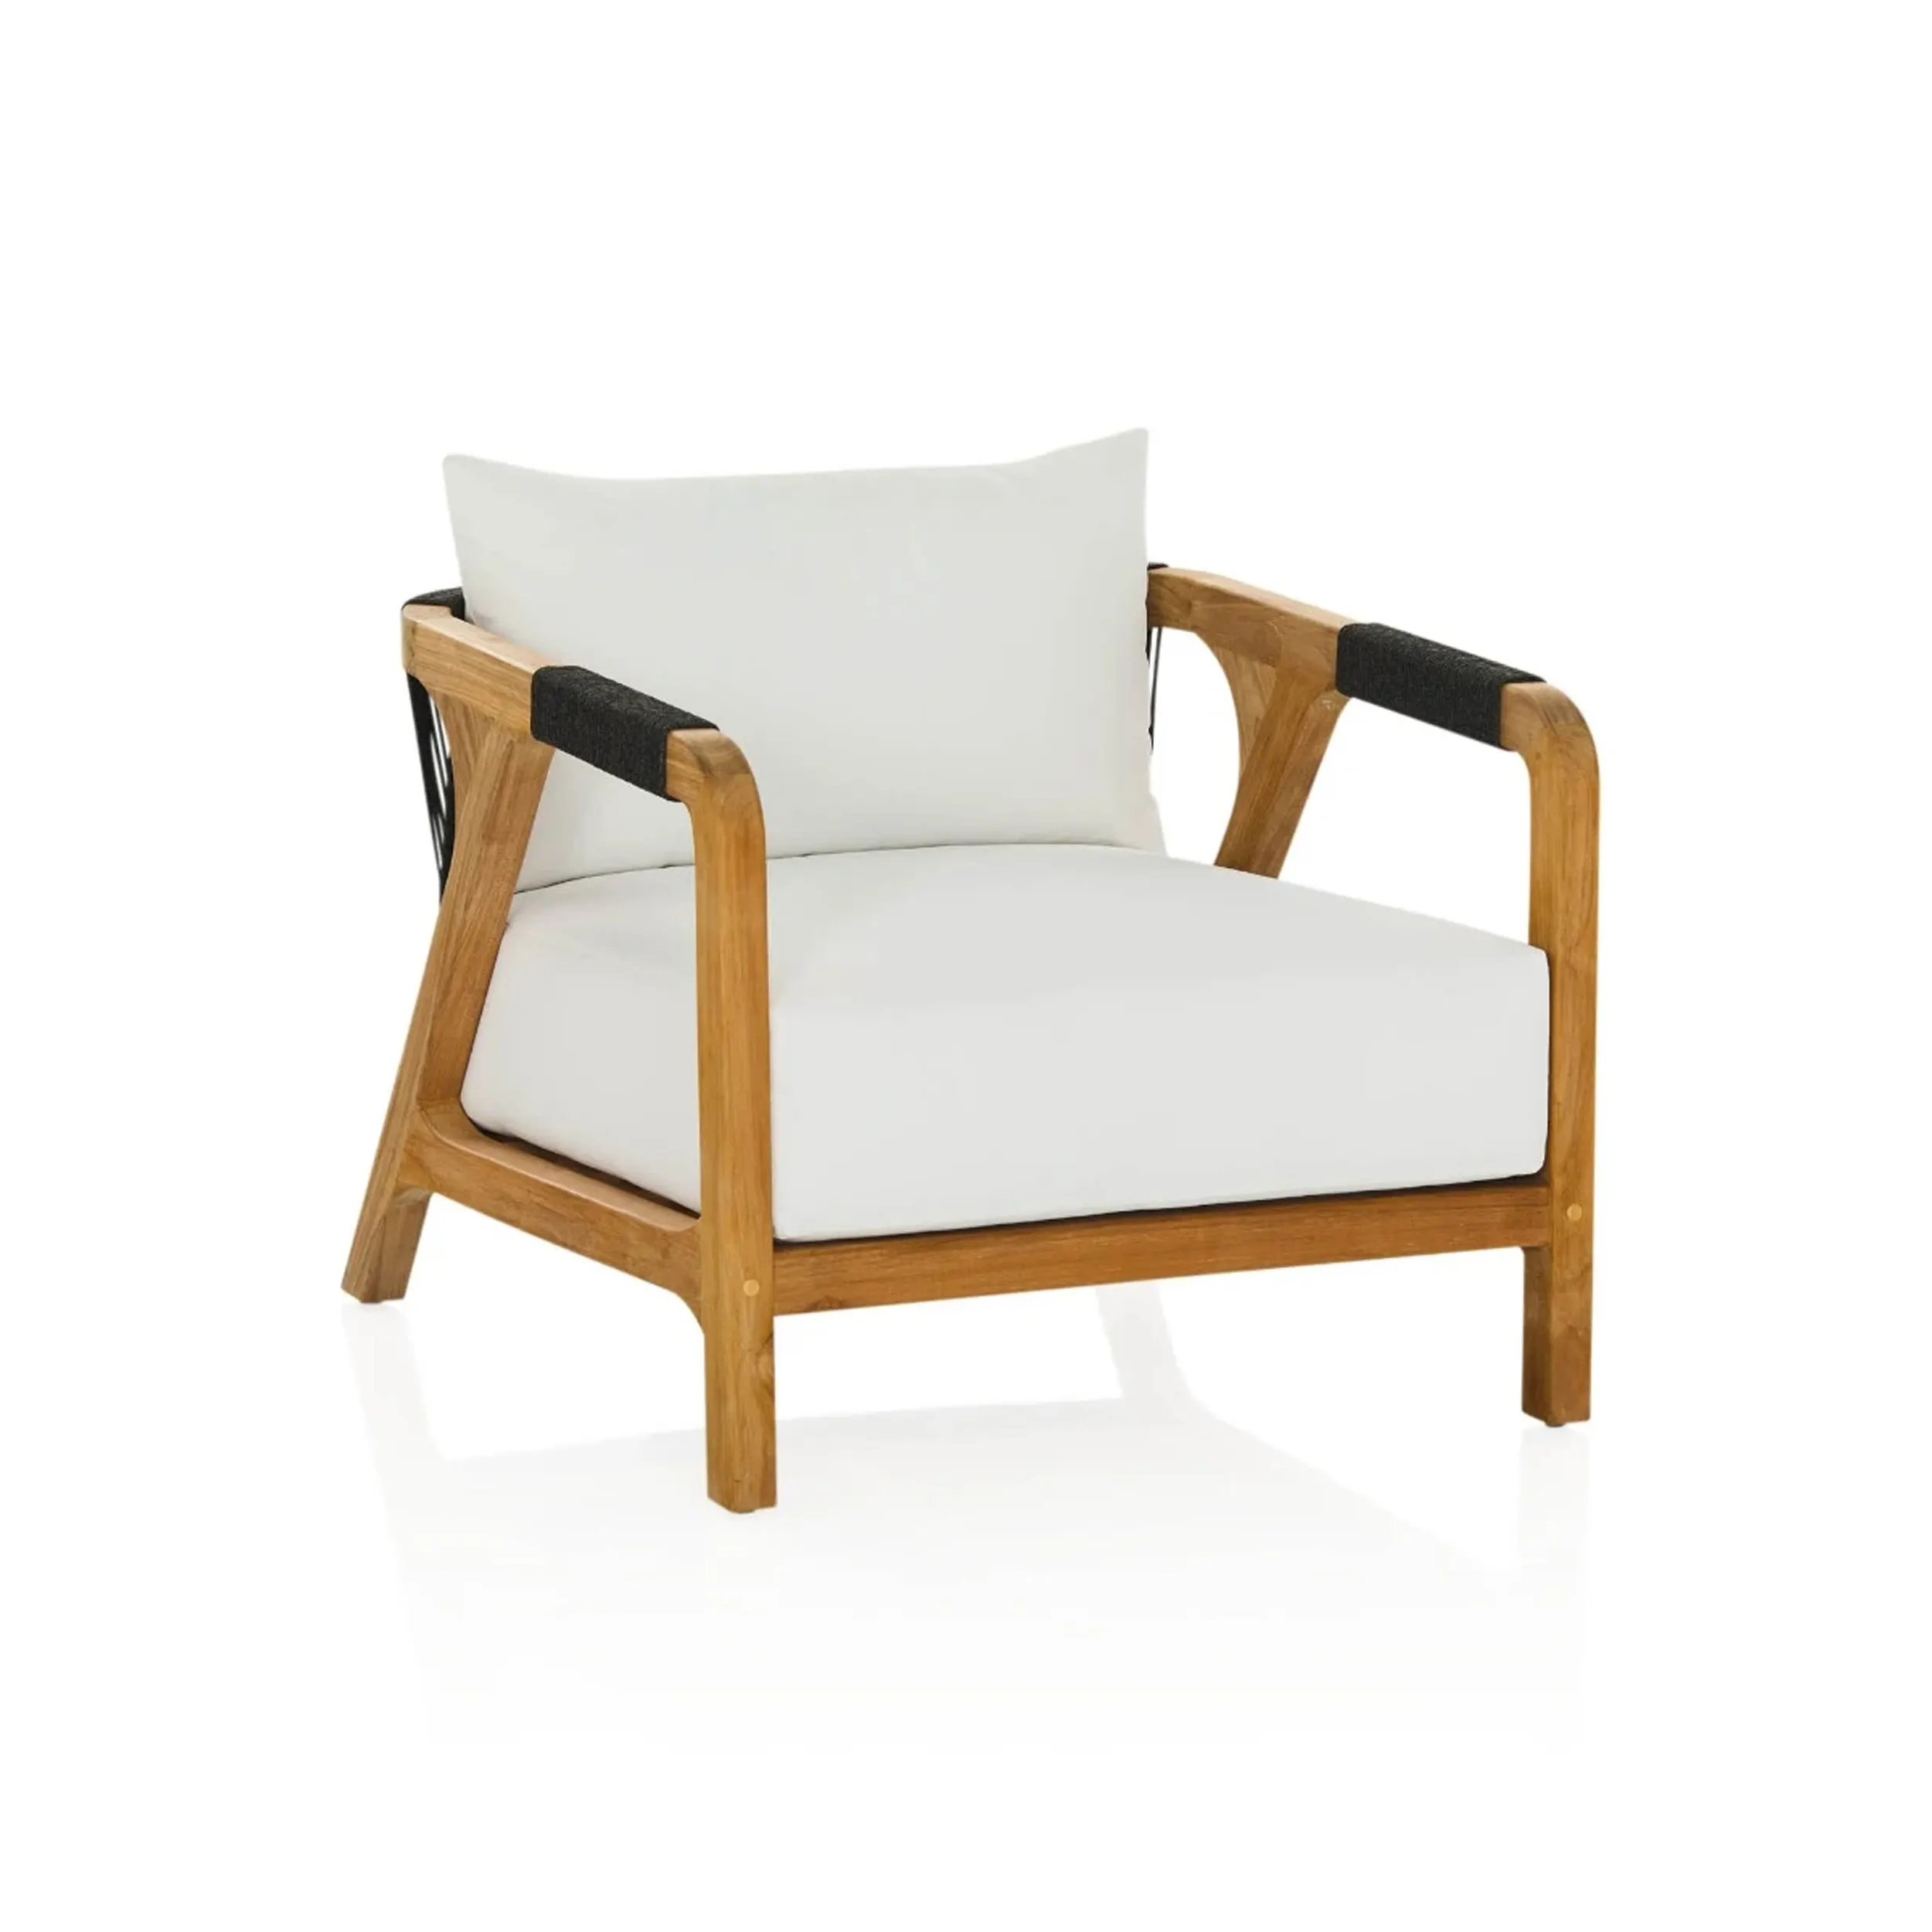 Lounge Chair Solid Teak Wood With Rattan And Cushion Outdoor-Wangsa